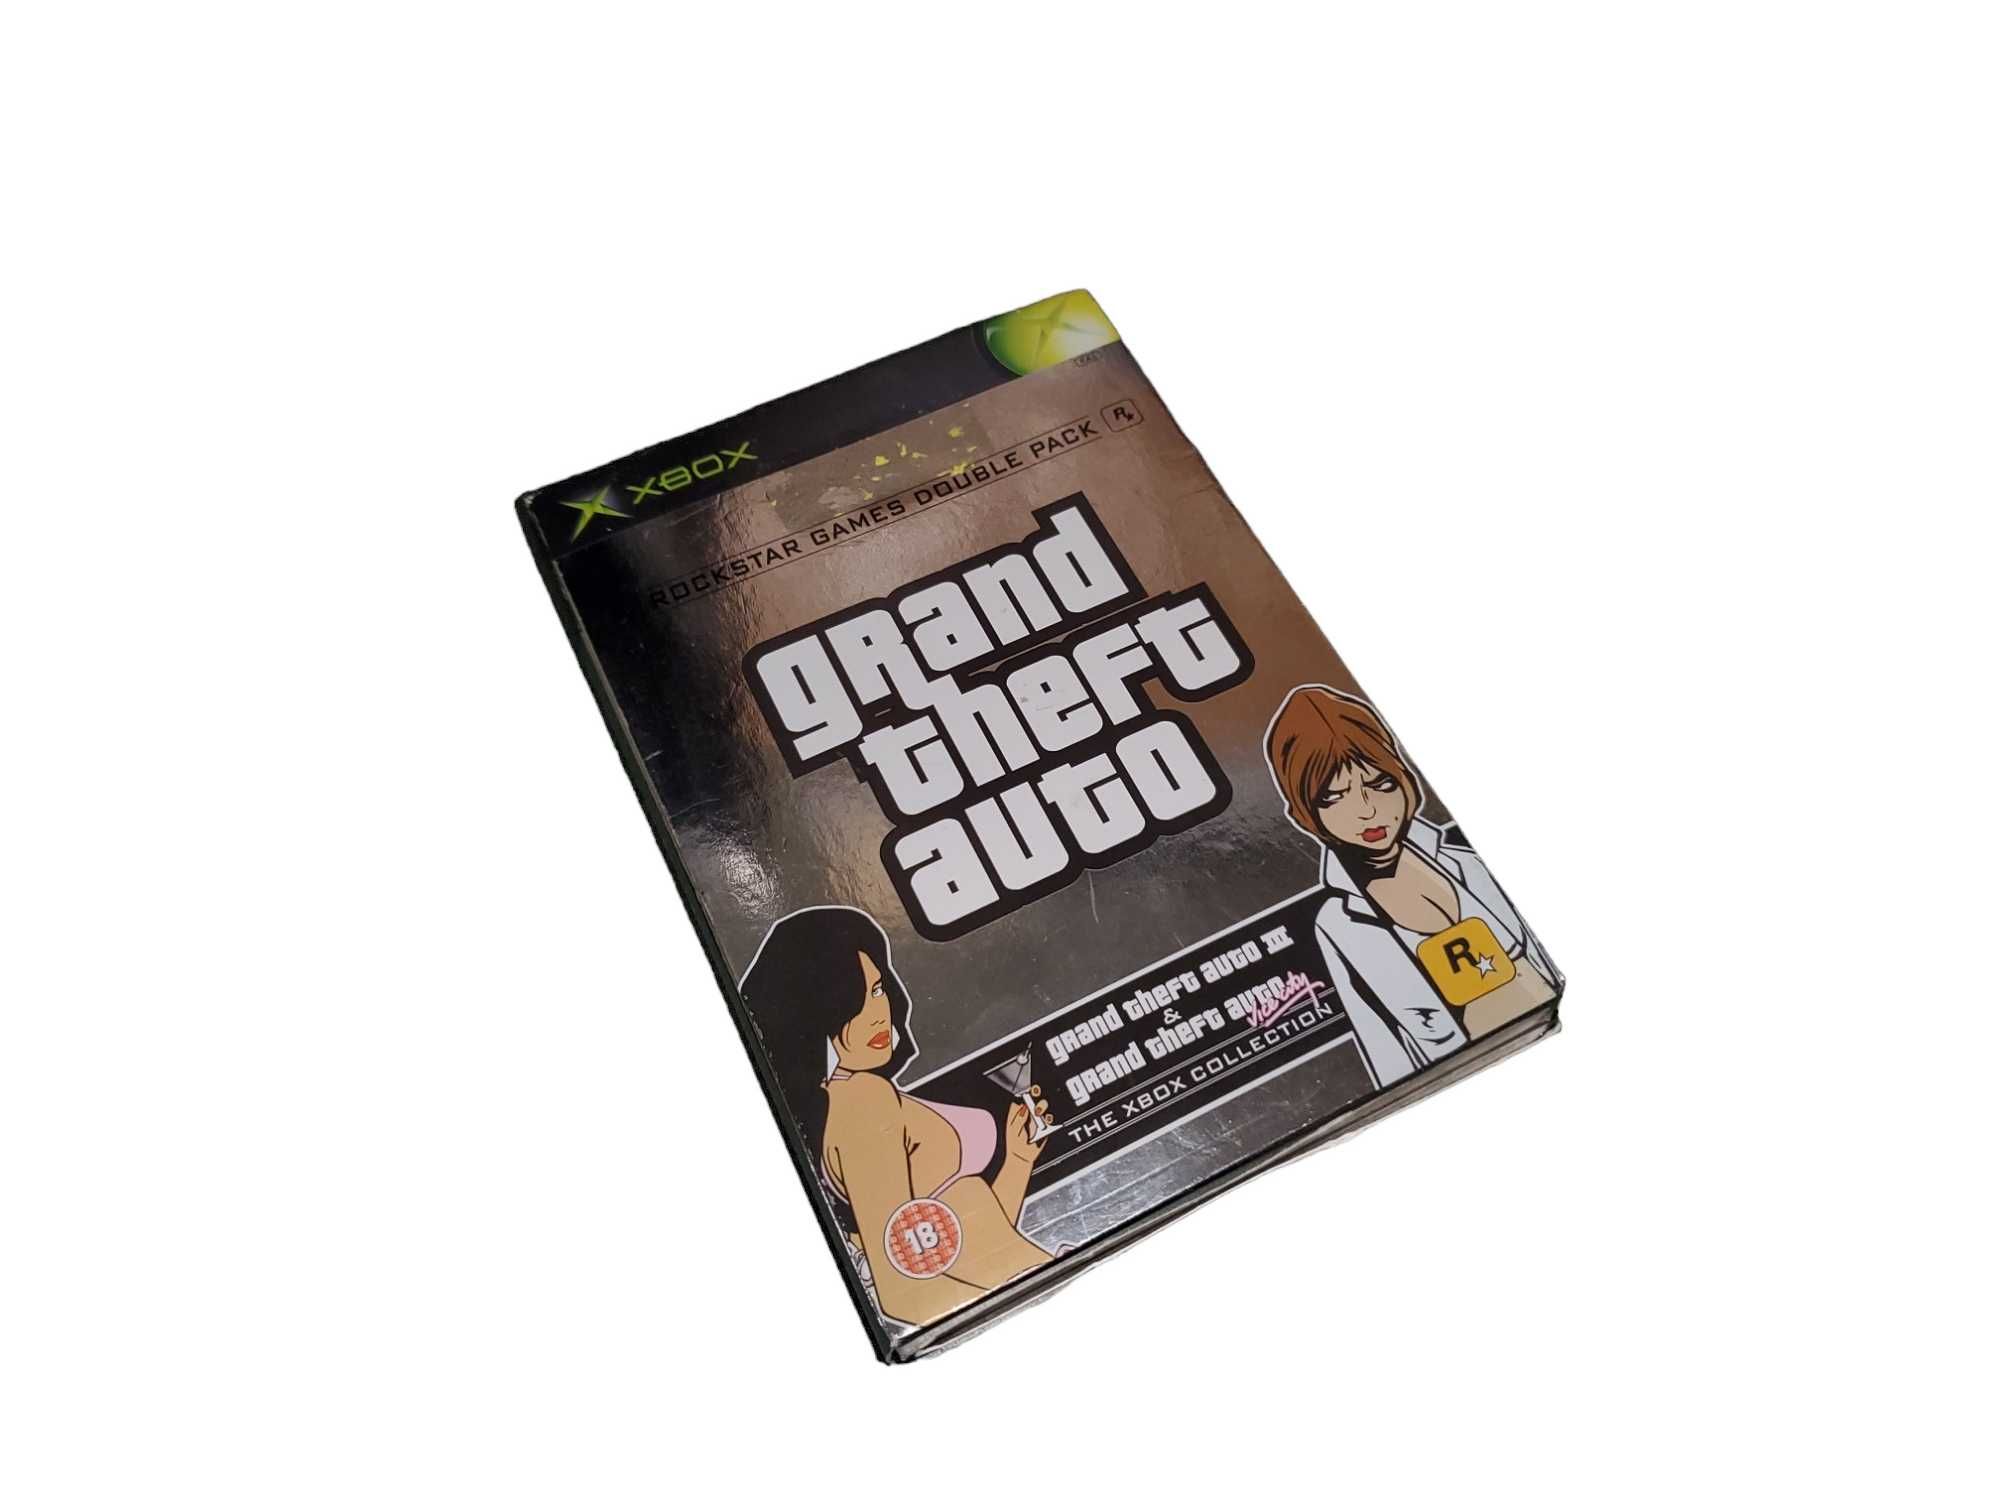 Grand Theft Auto: Double Pack XBOX